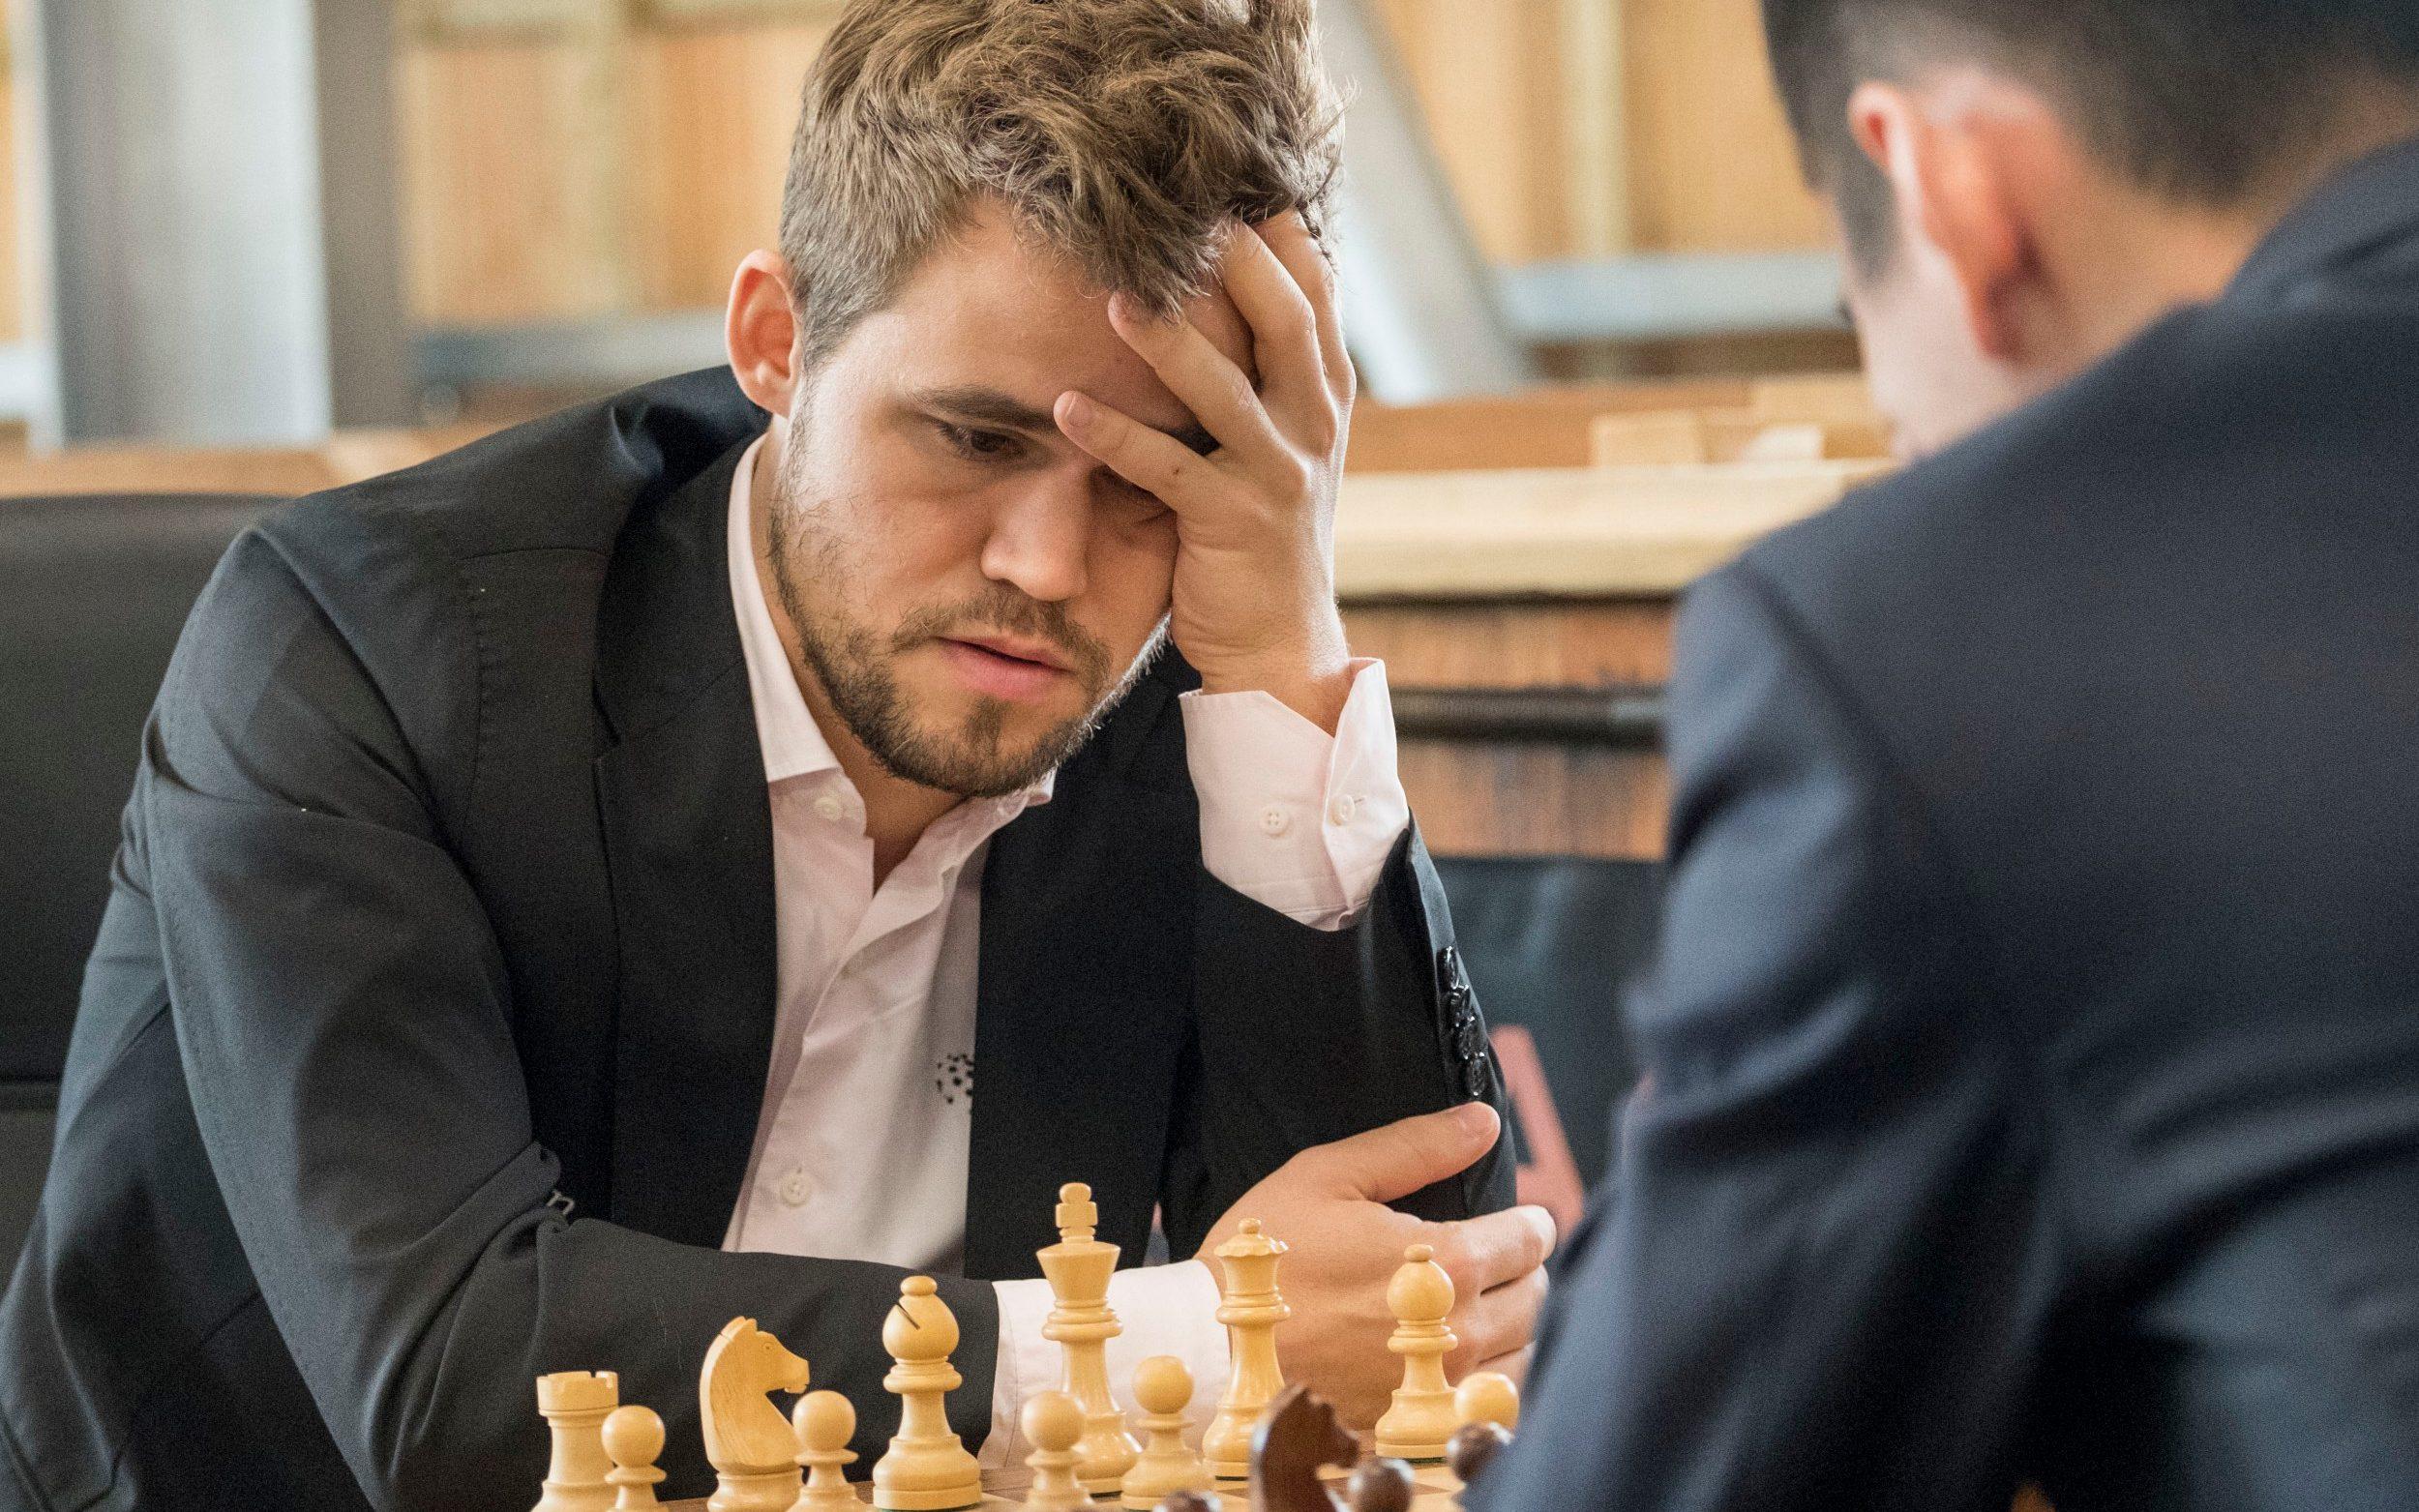 Chess-Carlsen may not defend world title due to lack of motivation